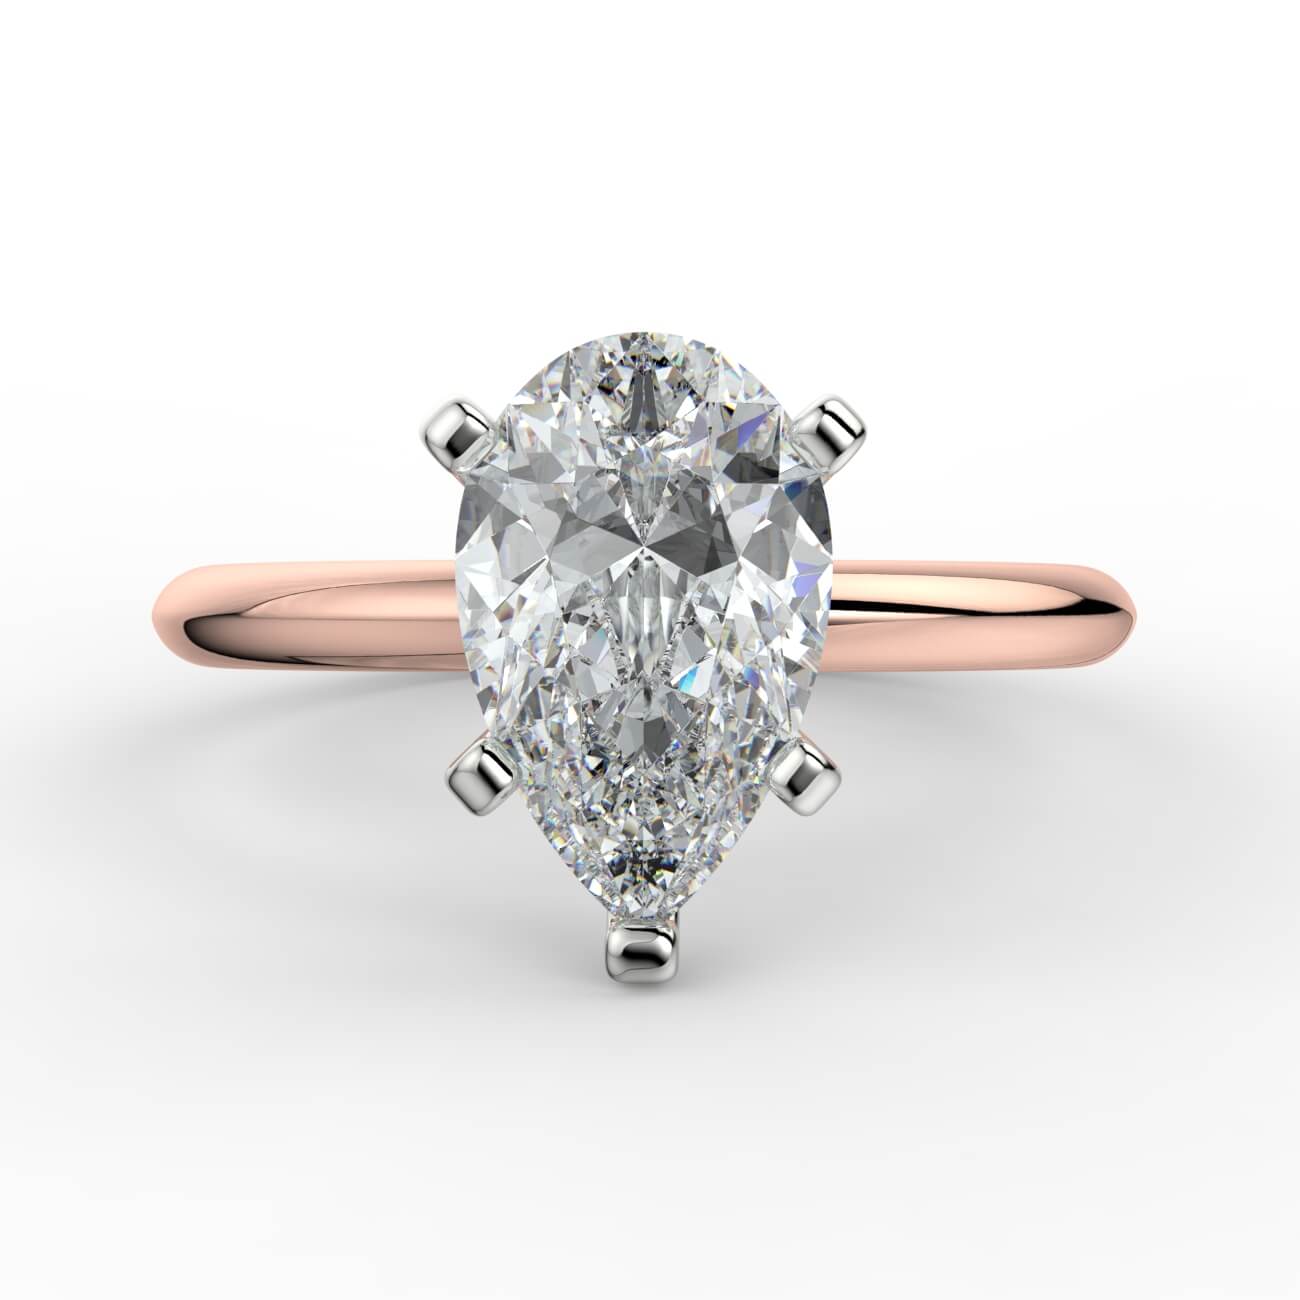 Knife-edge solitaire pear diamond engagement ring in white and rose gold – Australian Diamond Network